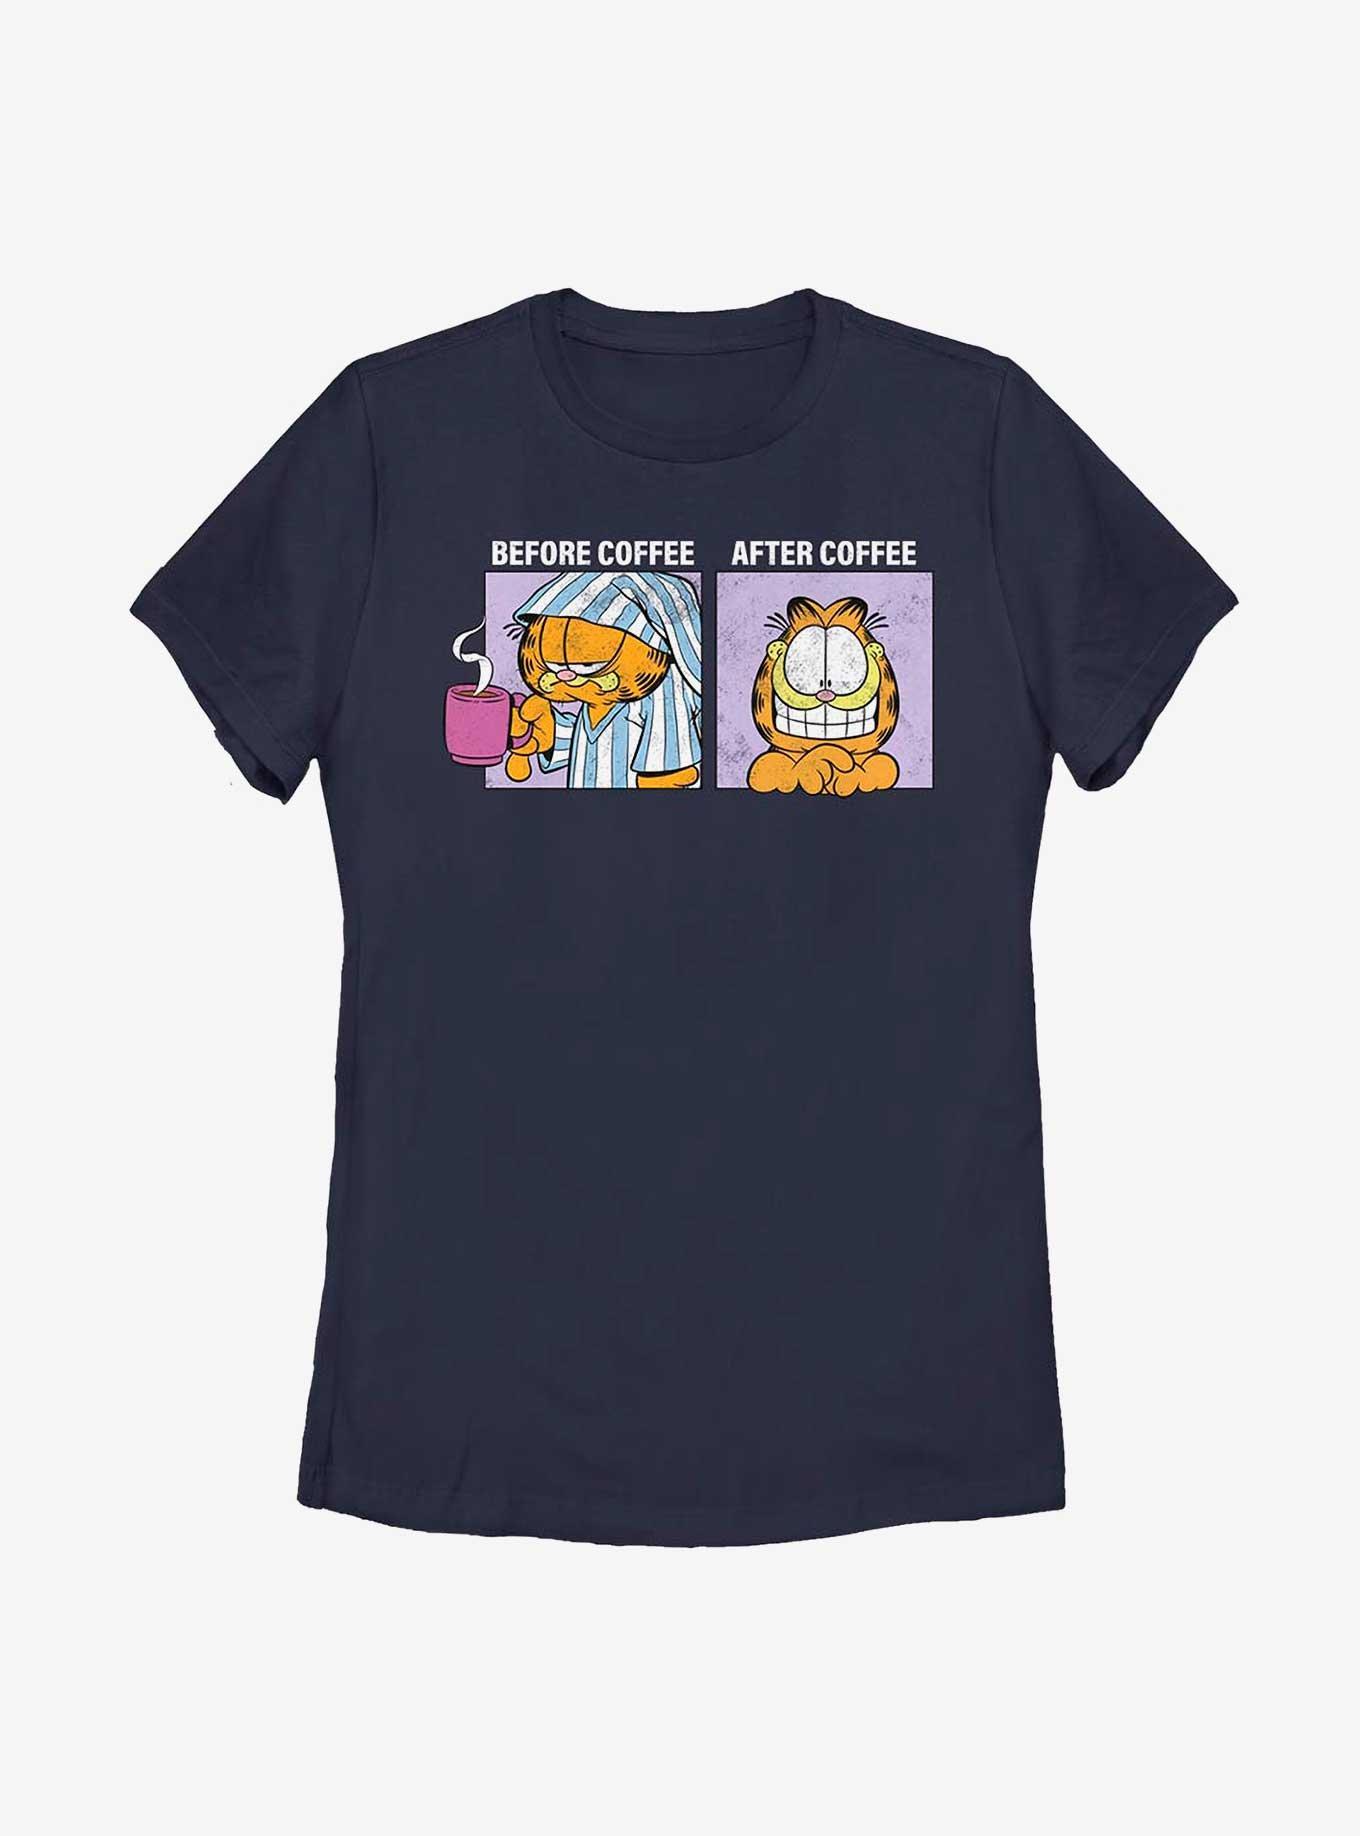 Garfield Before and After Coffee Women's T-Shirt, NAVY, hi-res